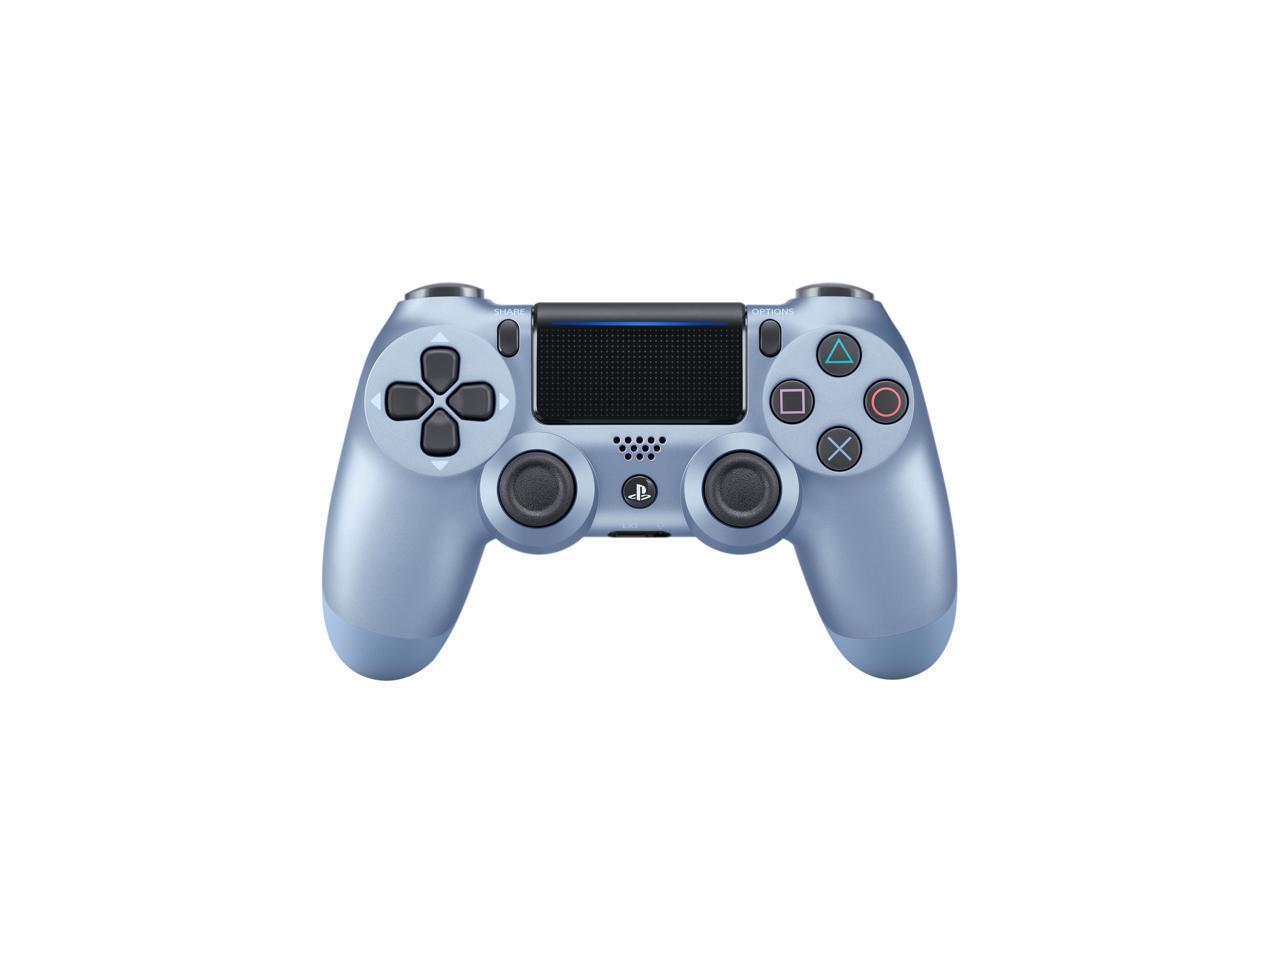 OEM DualShock 4 Wireless Controller for Sony PlayStation 4 - Titanium Blue (CUH-ZCT2)